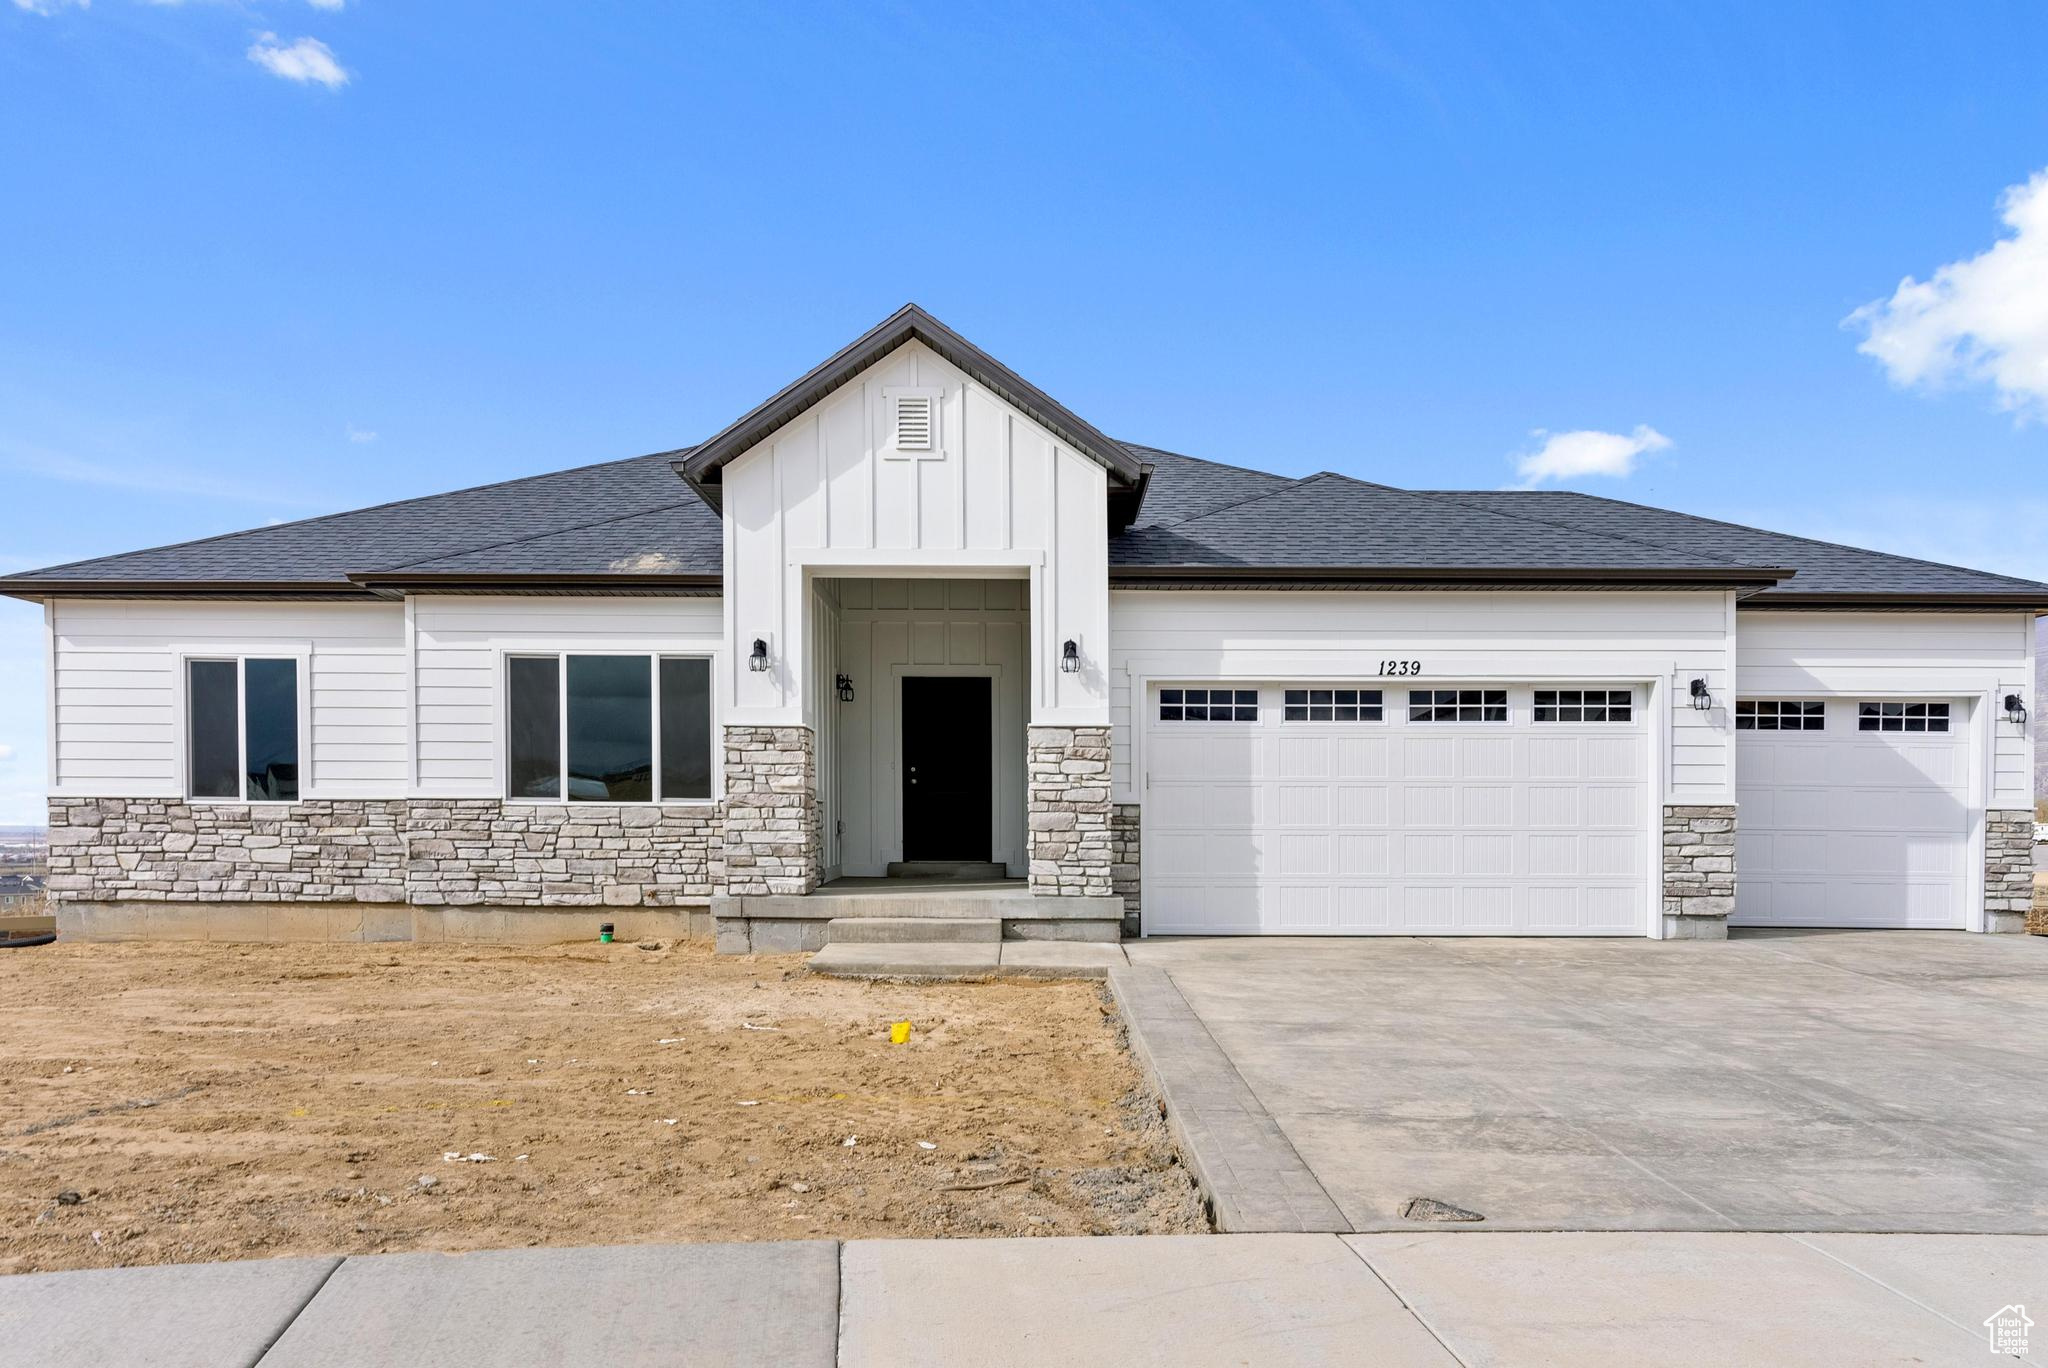 1618 WHITE SAGE #314, Santaquin, Utah 84655, 3 Bedrooms Bedrooms, 10 Rooms Rooms,2 BathroomsBathrooms,Residential,For sale,WHITE SAGE,1978053